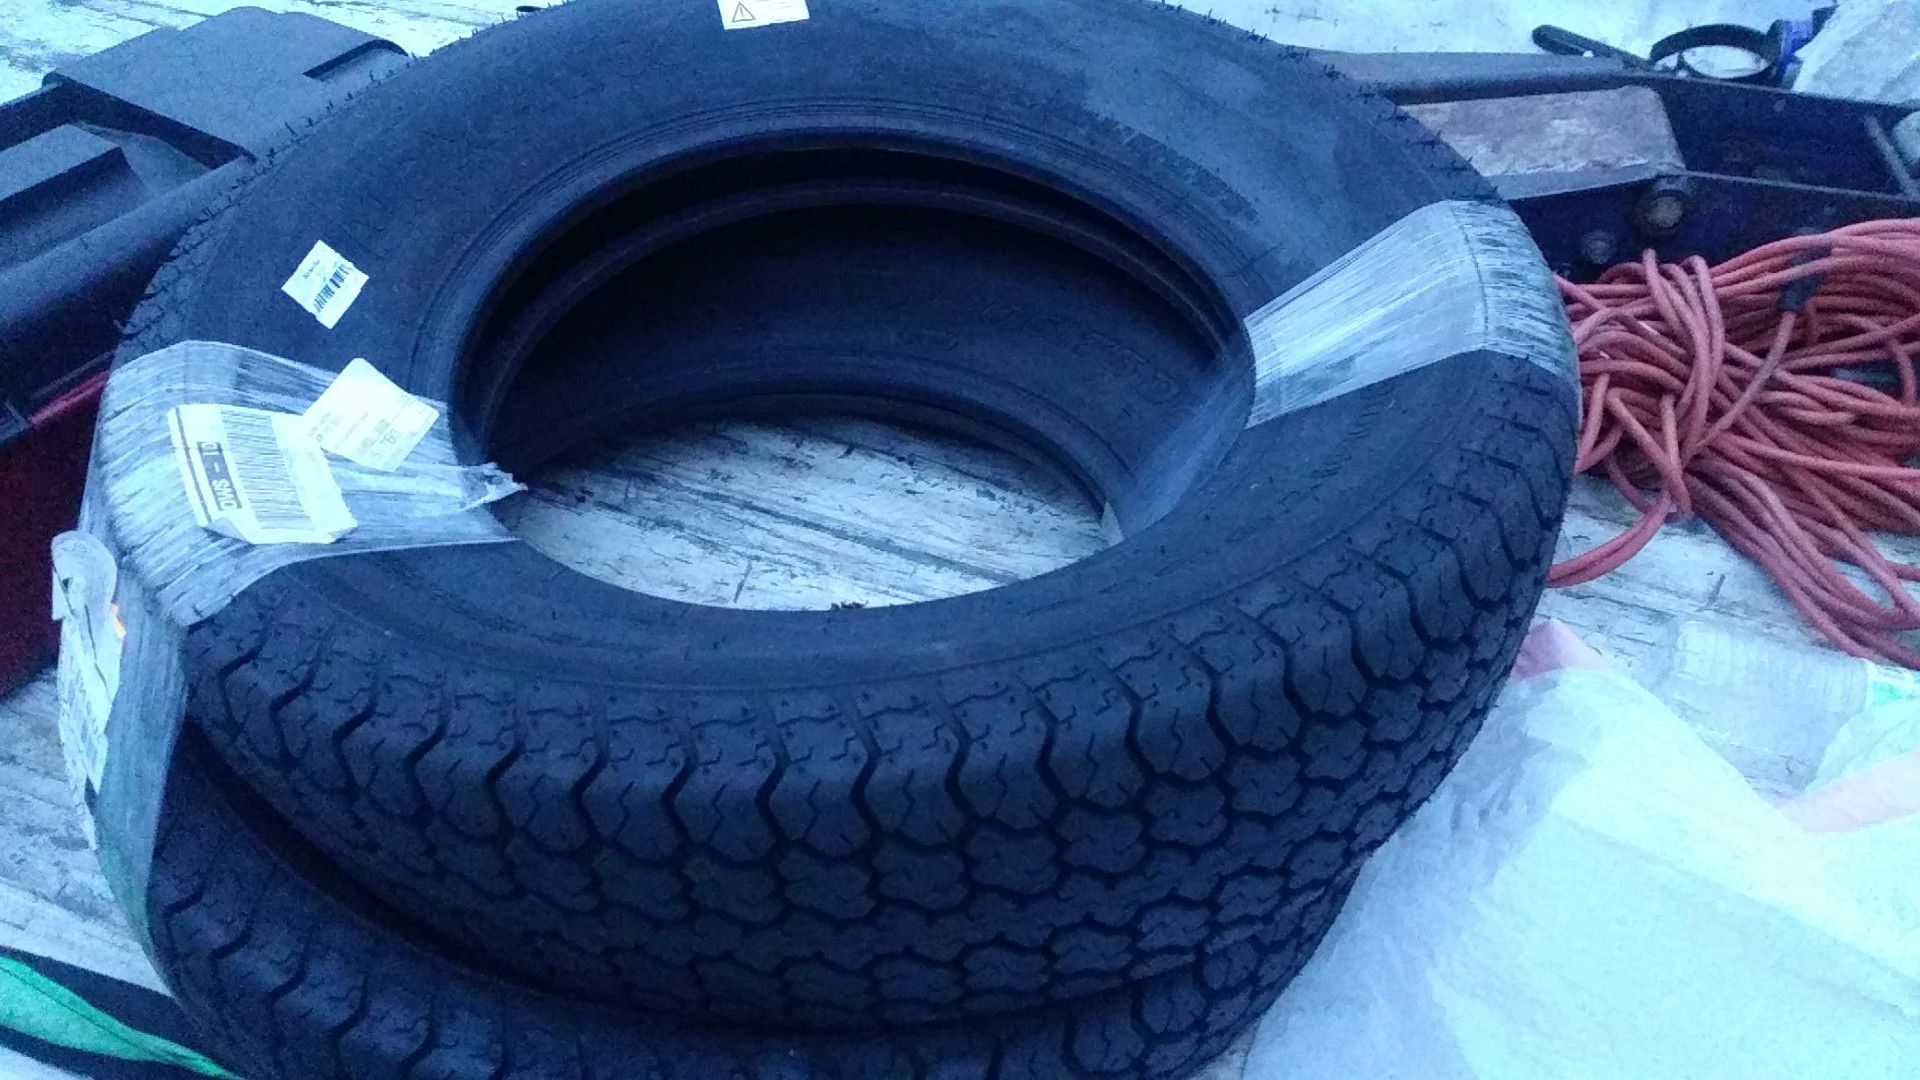 205/75 15 TRAILER TIRES NEW